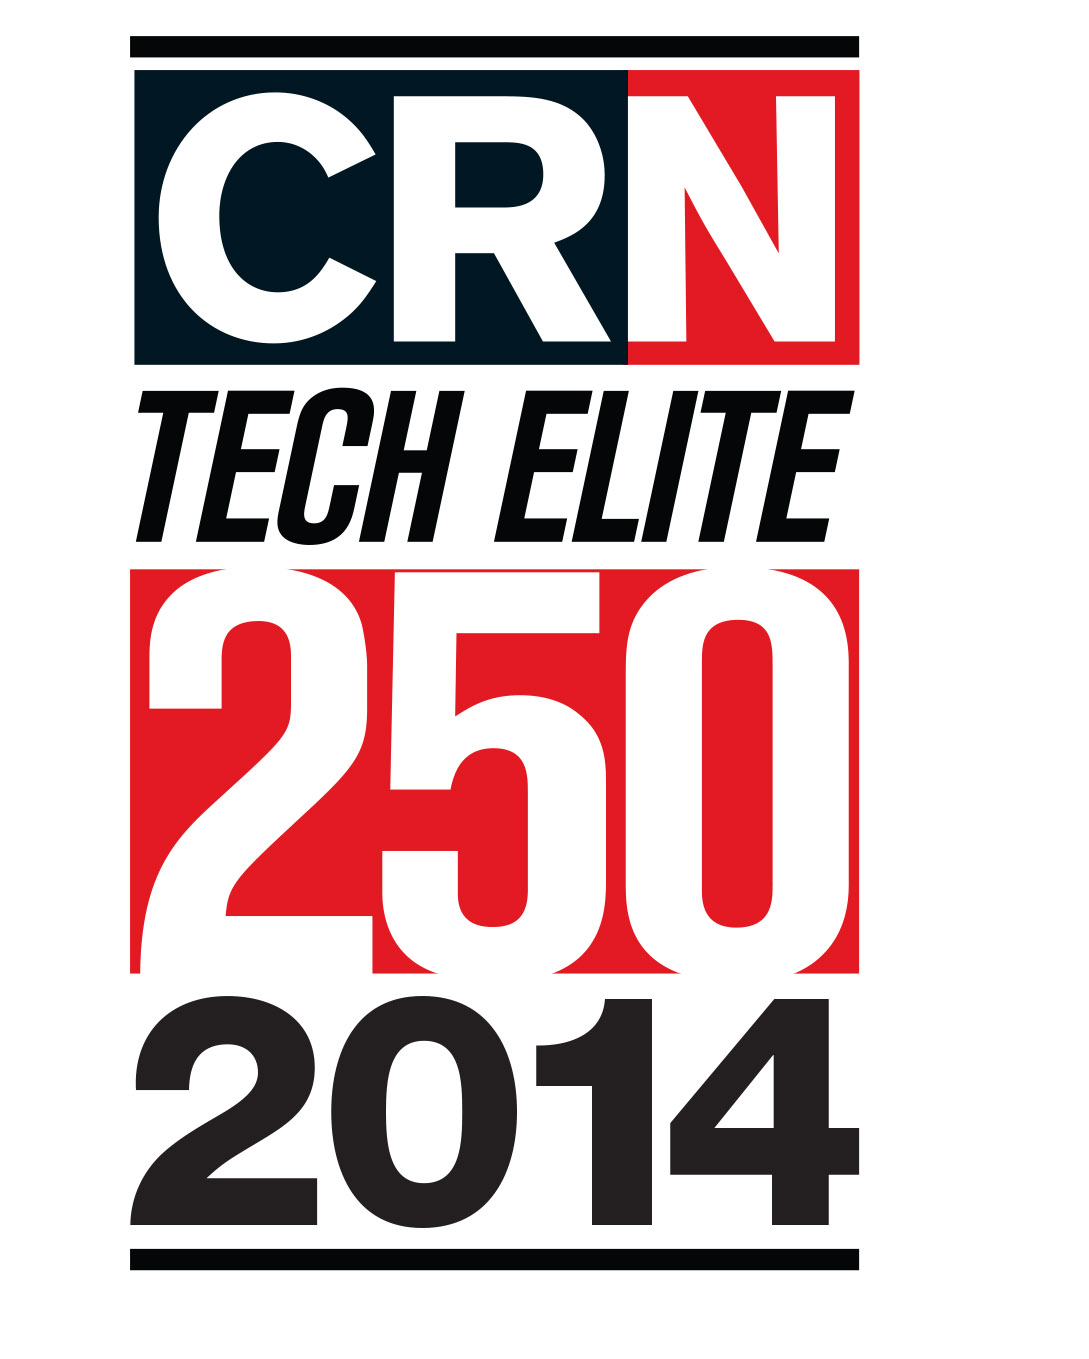 Force 3 named to CRN Tech Elite 250